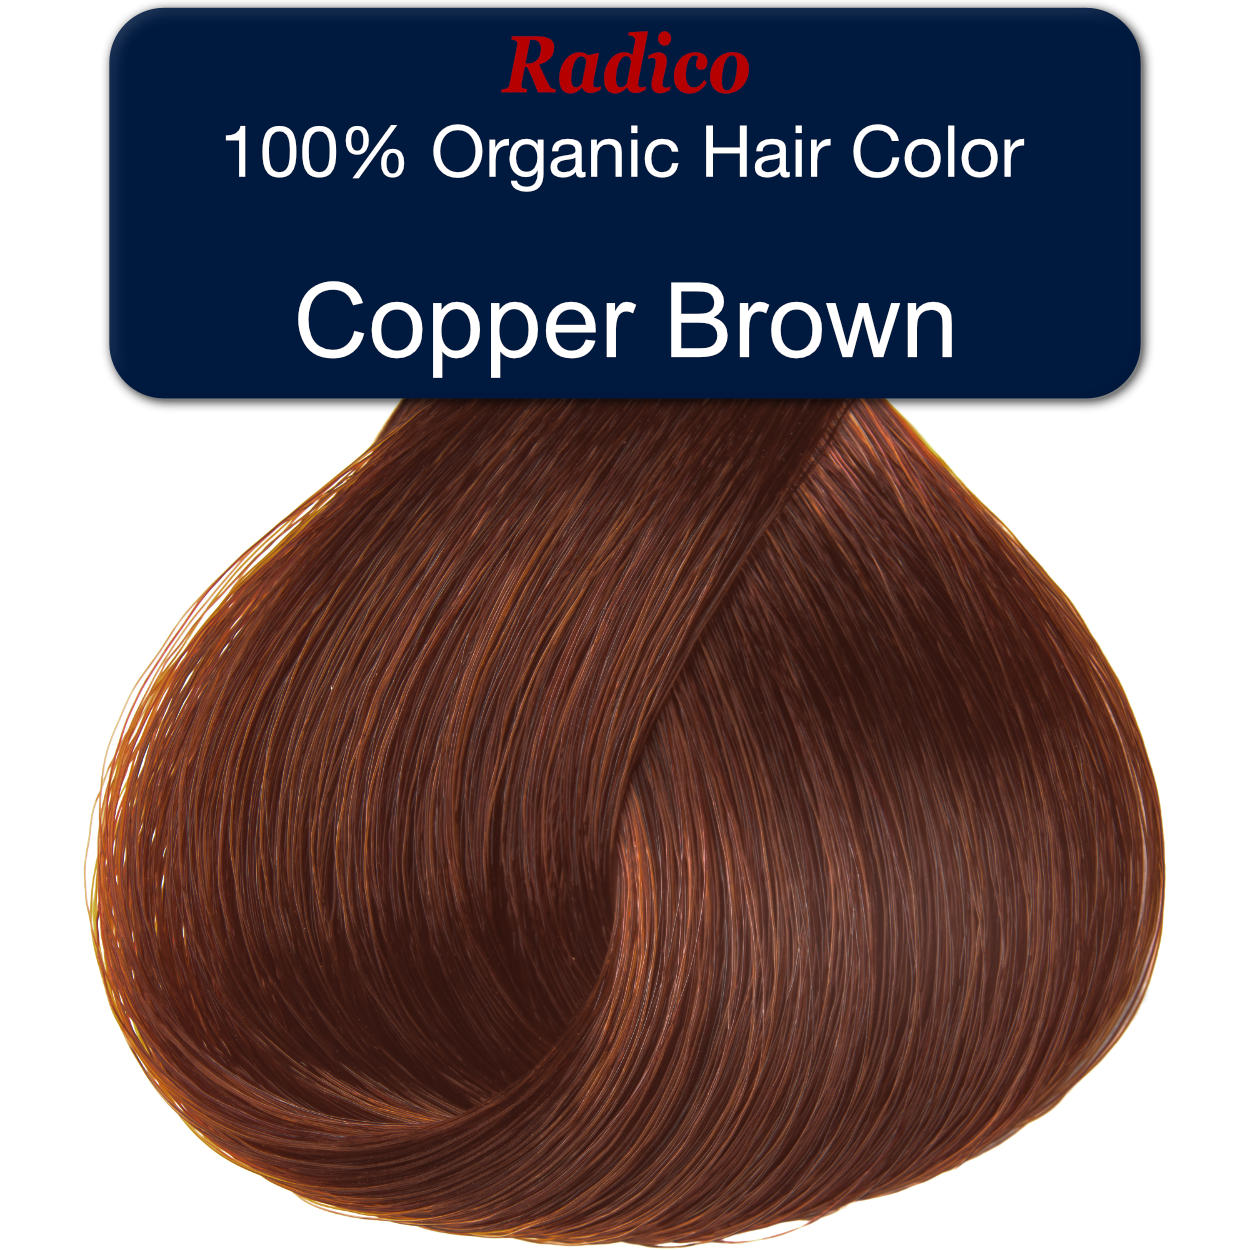 Get a Natural-Looking Copper Brown with 100% Organic Hair Dye. – Radico USA